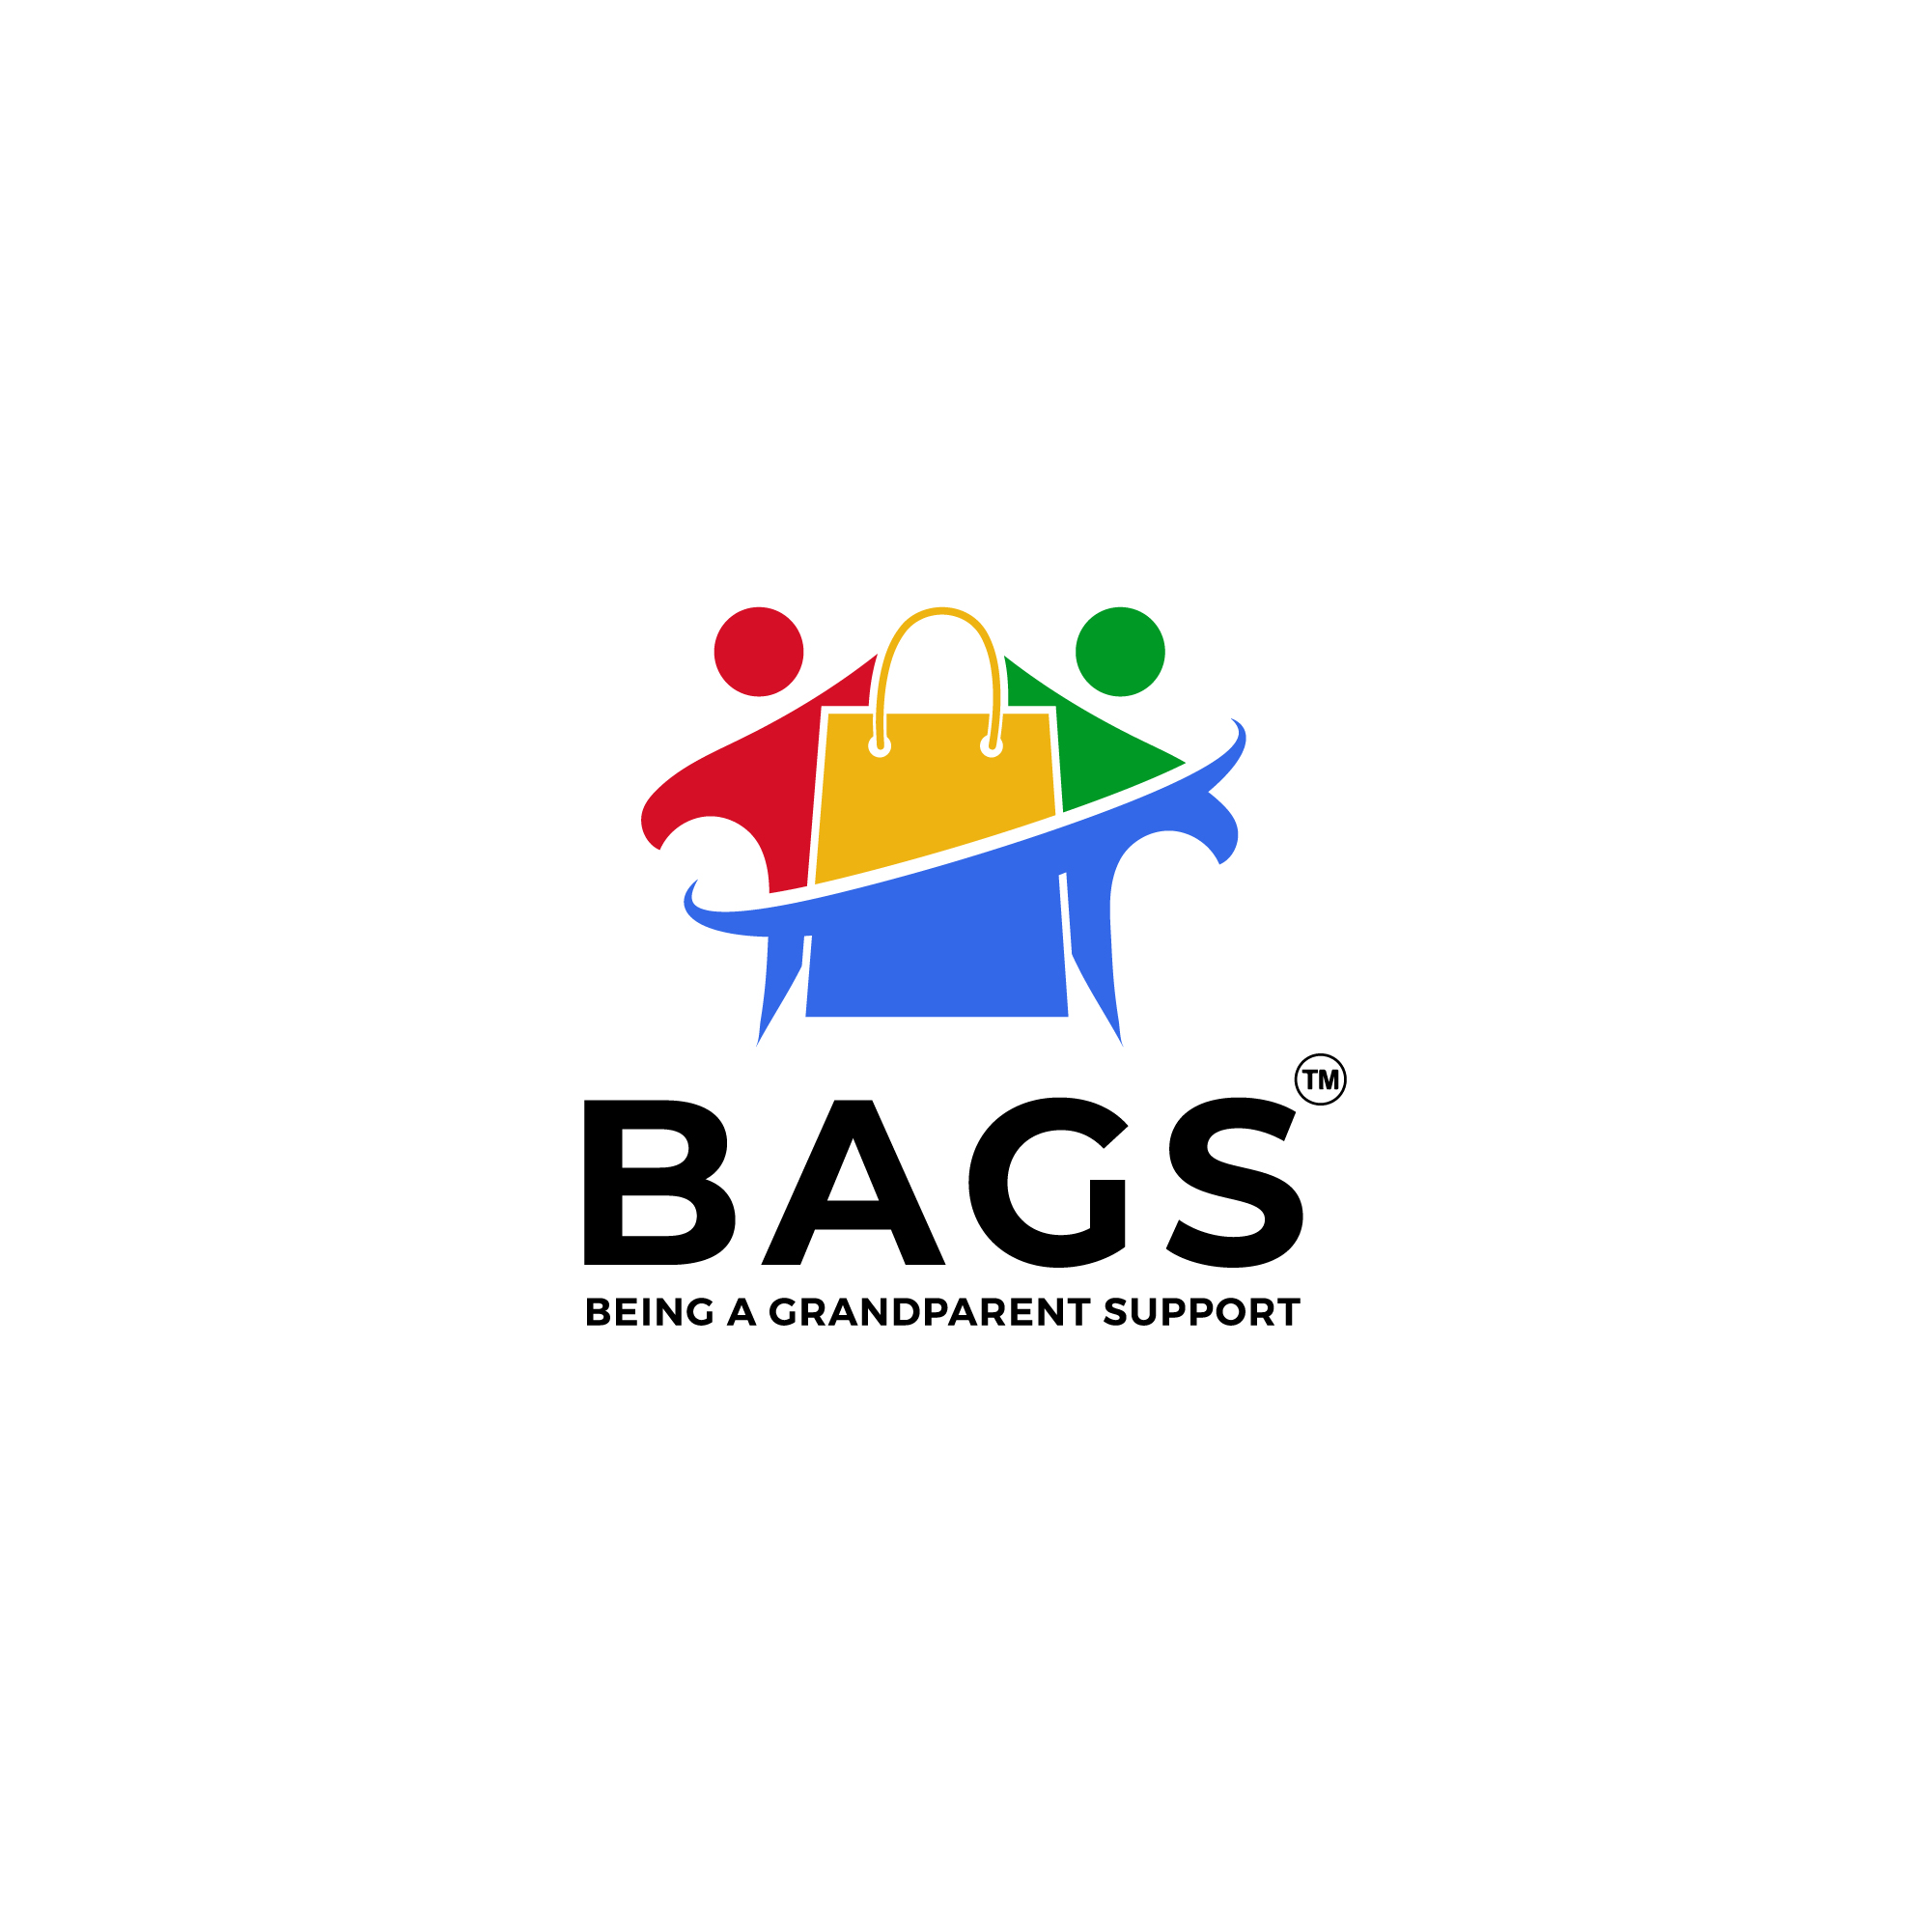 BAGS - Being a Grandparent Support